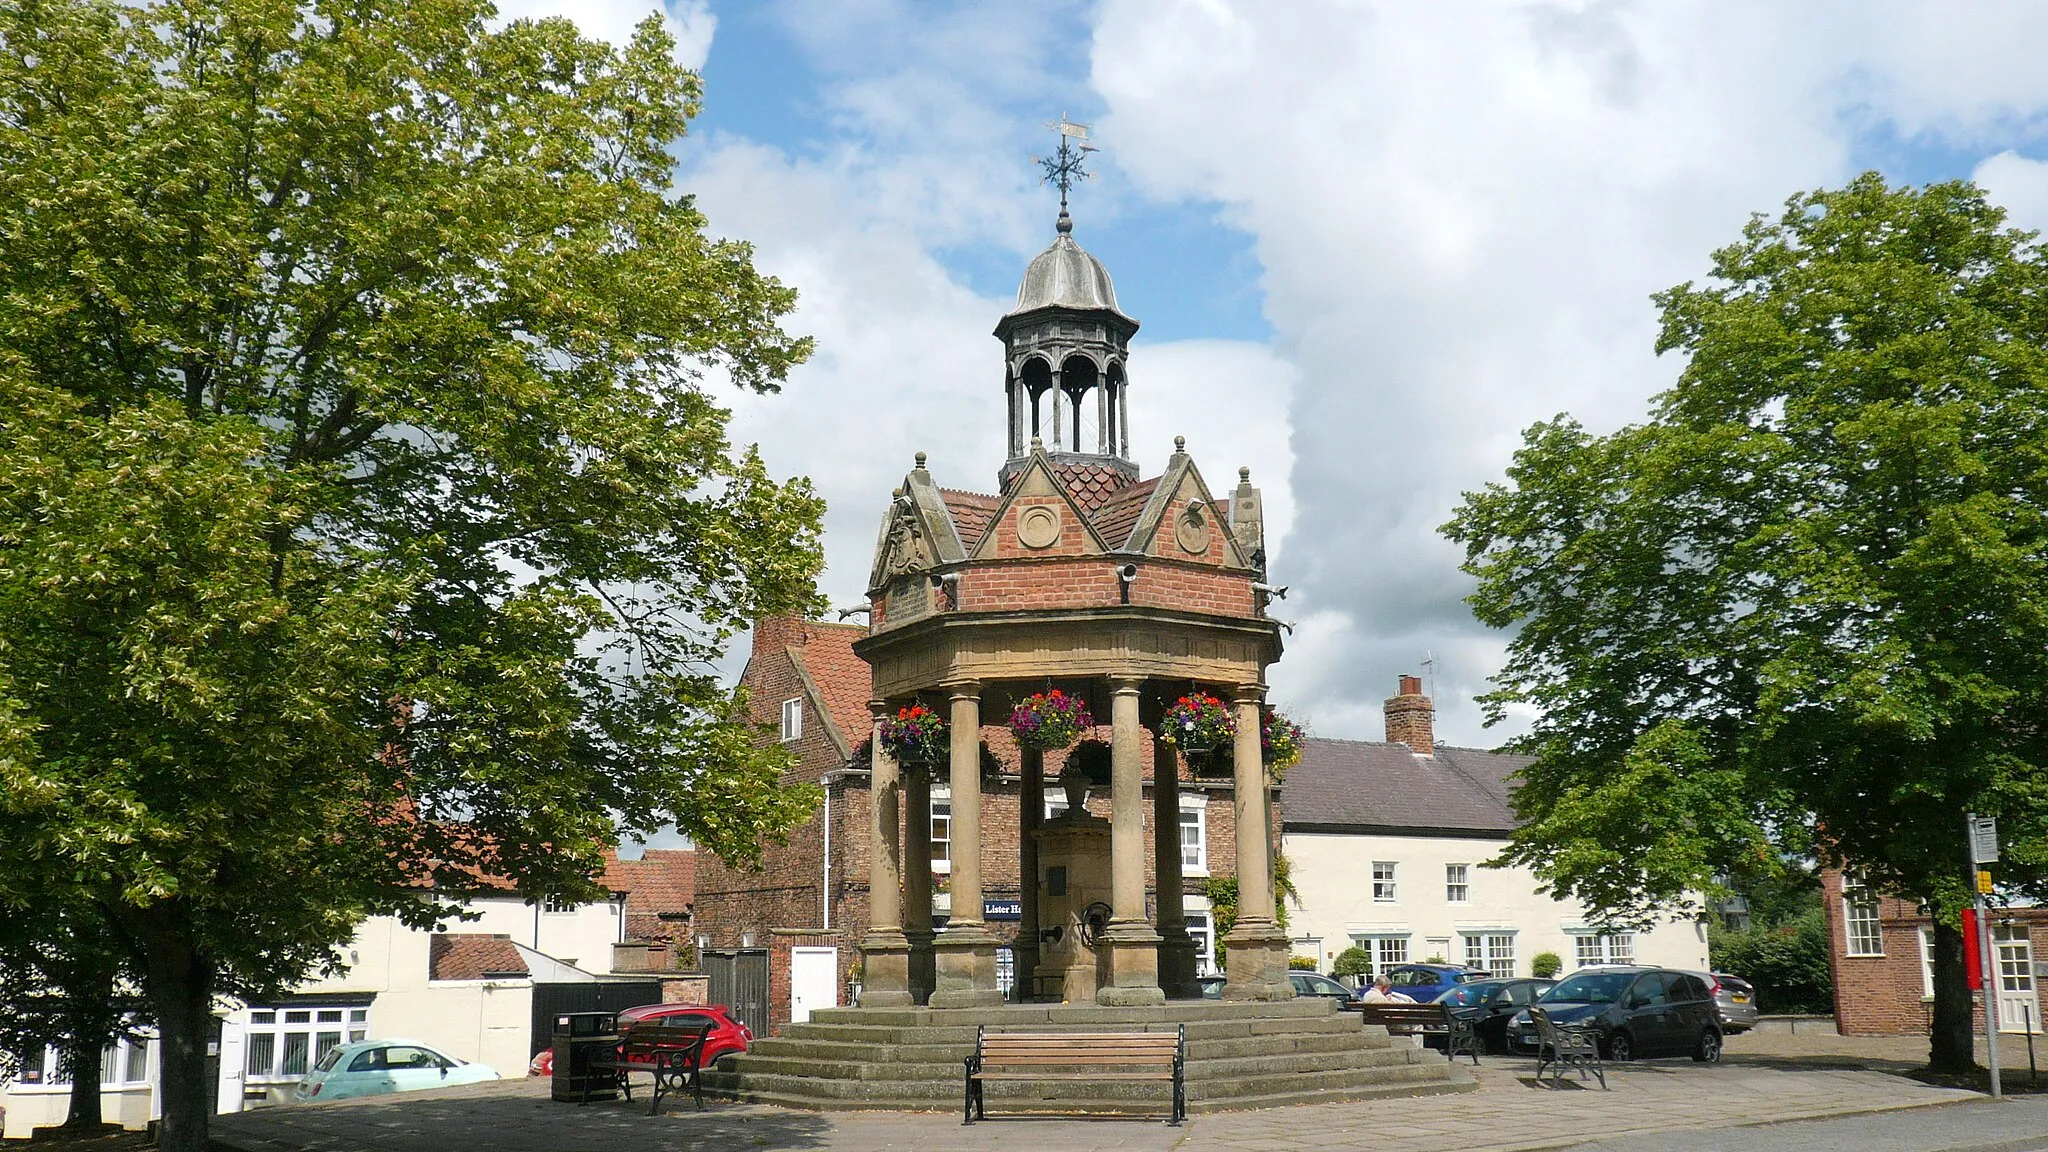 Photo showing: The cover over the 256-foot deep artesian well was built in 1875. It was gifted to the town by Mrs Lawson of Aldborough Manor in memory of her husband Andrew, who had died three years earlier. The extravagant canopy is one of the most ornate in England.